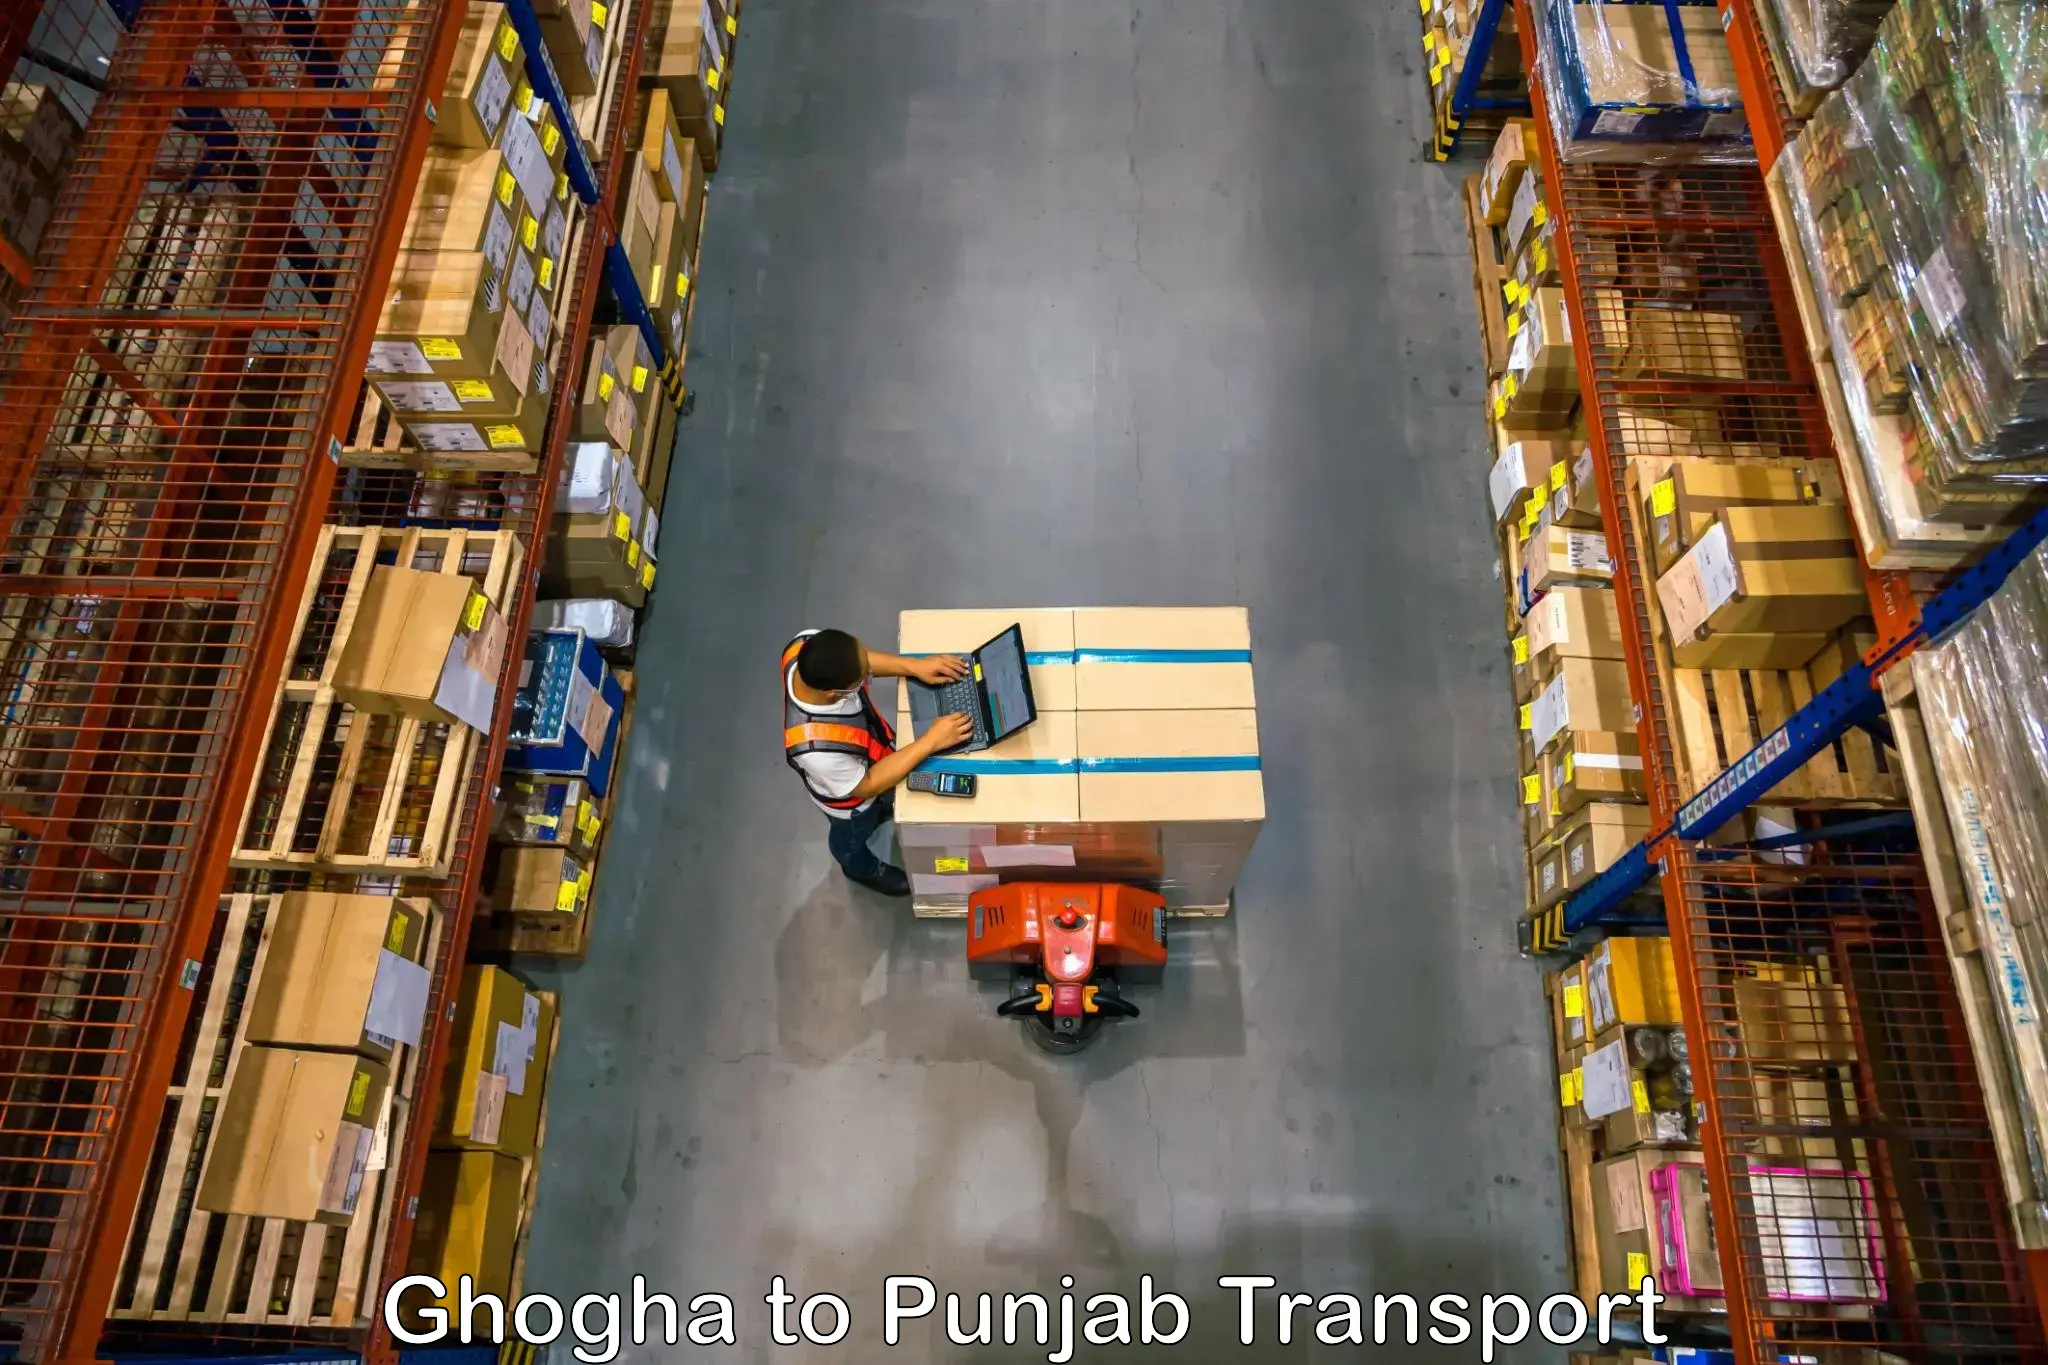 Road transport online services Ghogha to Mohali